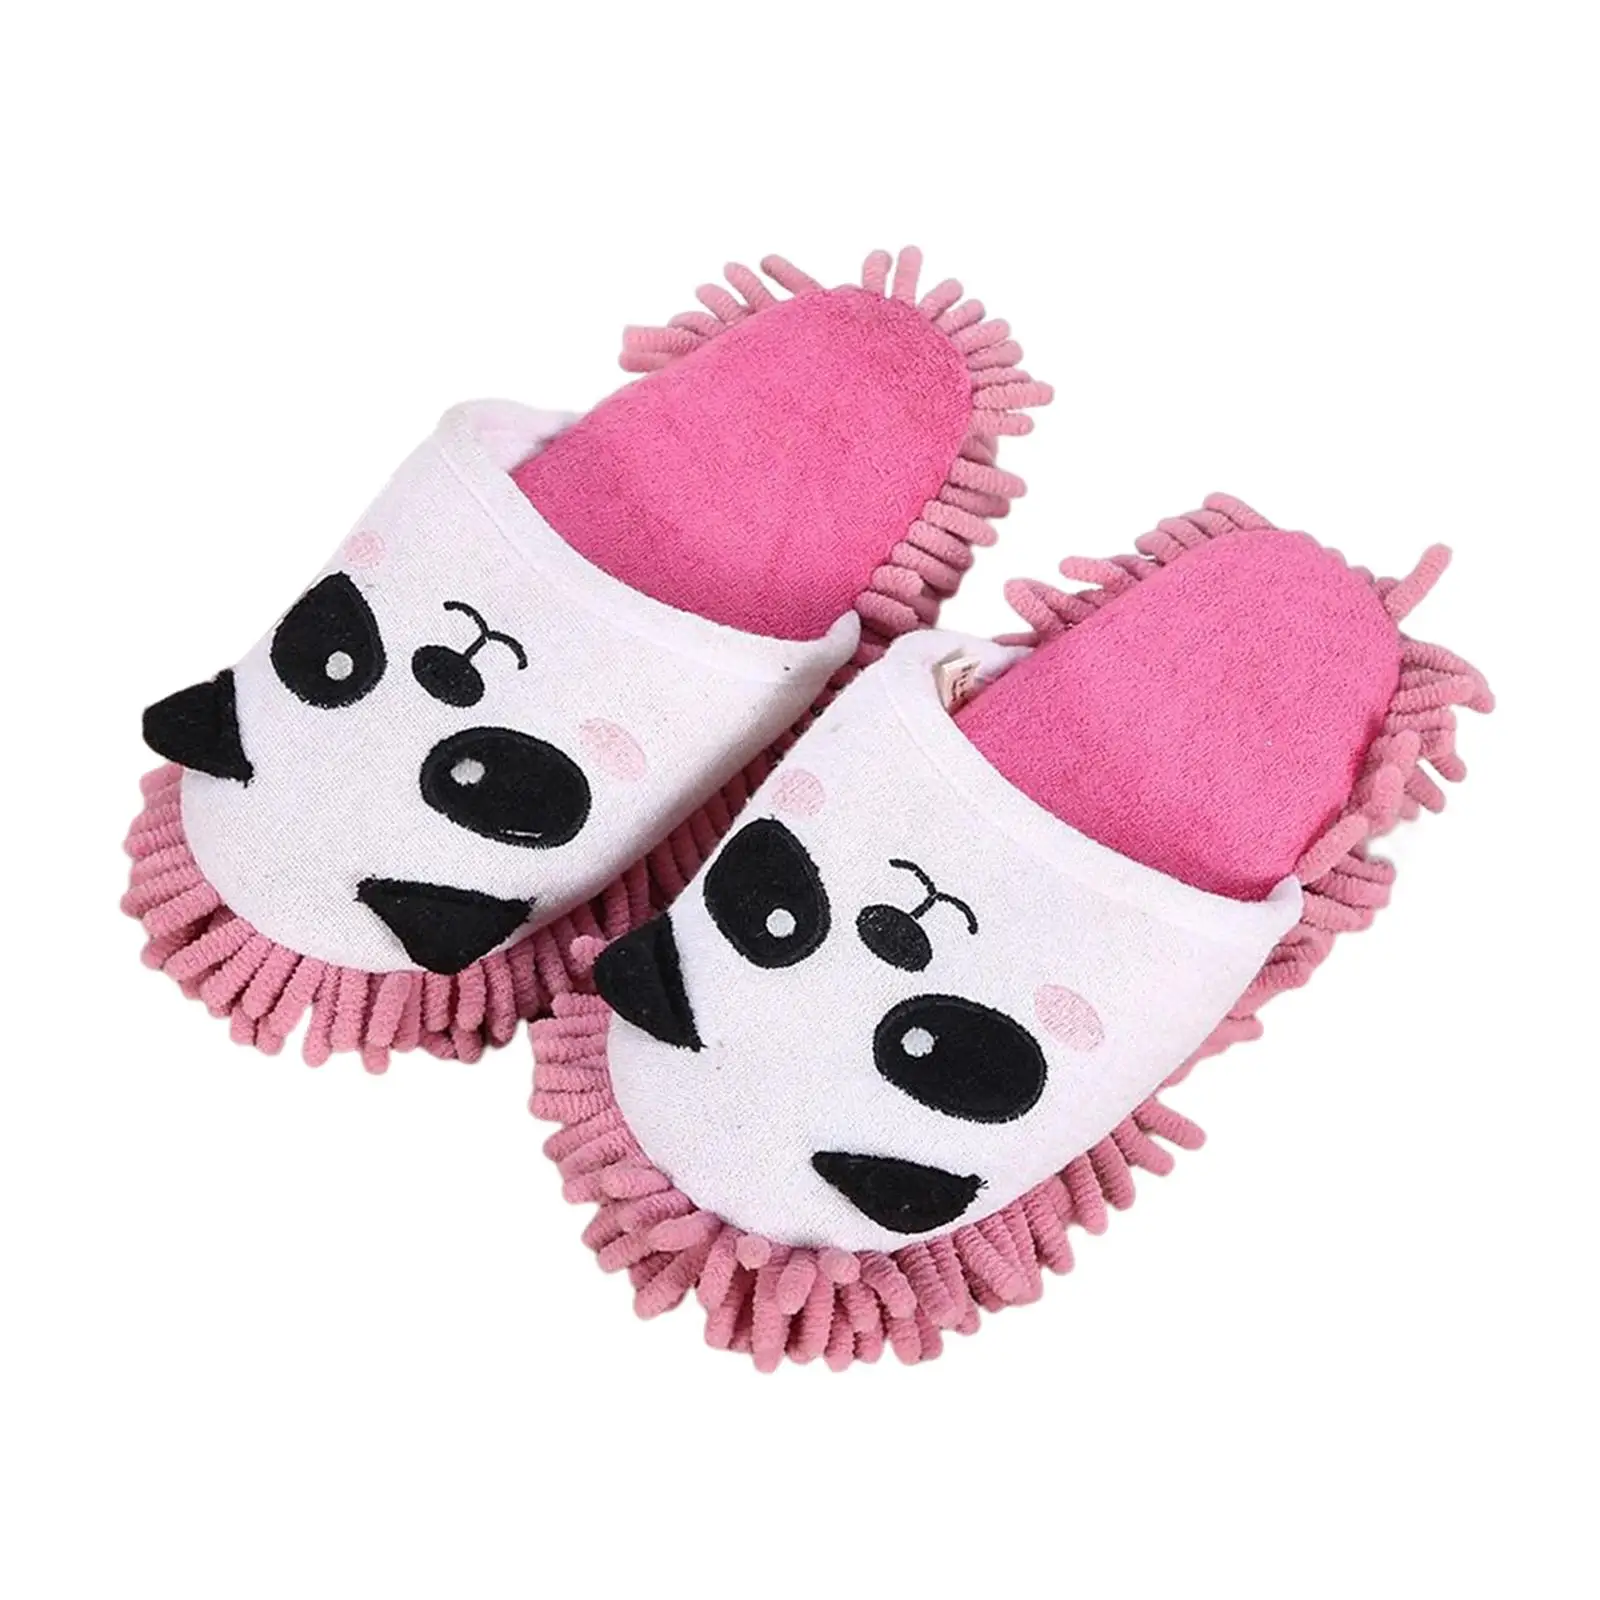 Mop Slippers Cleaning Tools House Slipper Mopping Shoes for Bedroom Floor Dust Cleaning